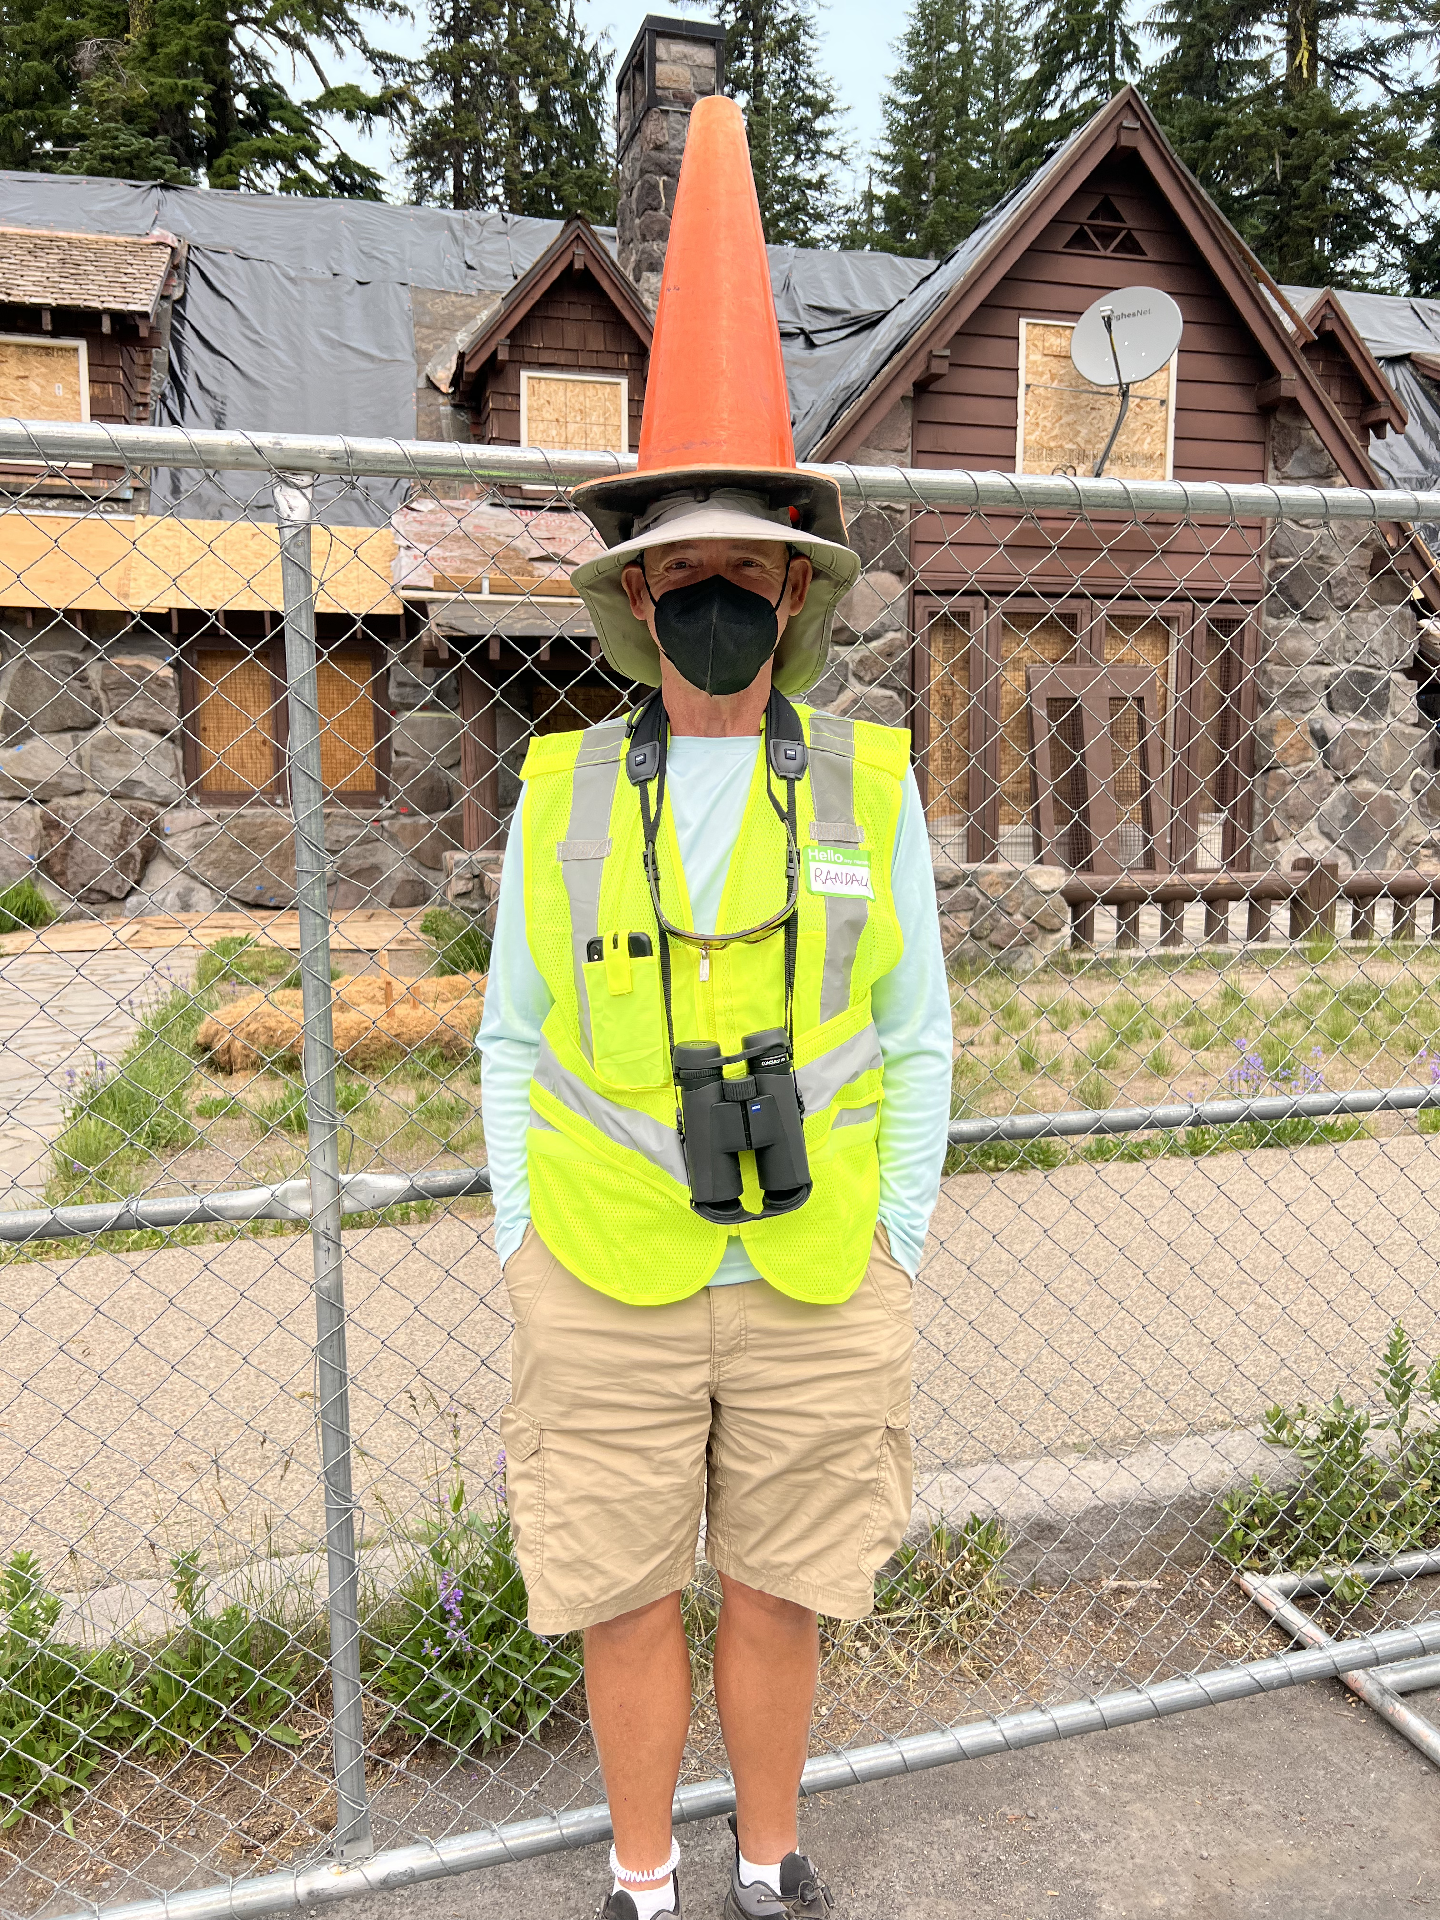  Randall, who I believe said he was from France, demos an interesting new use for our traffic cones. 